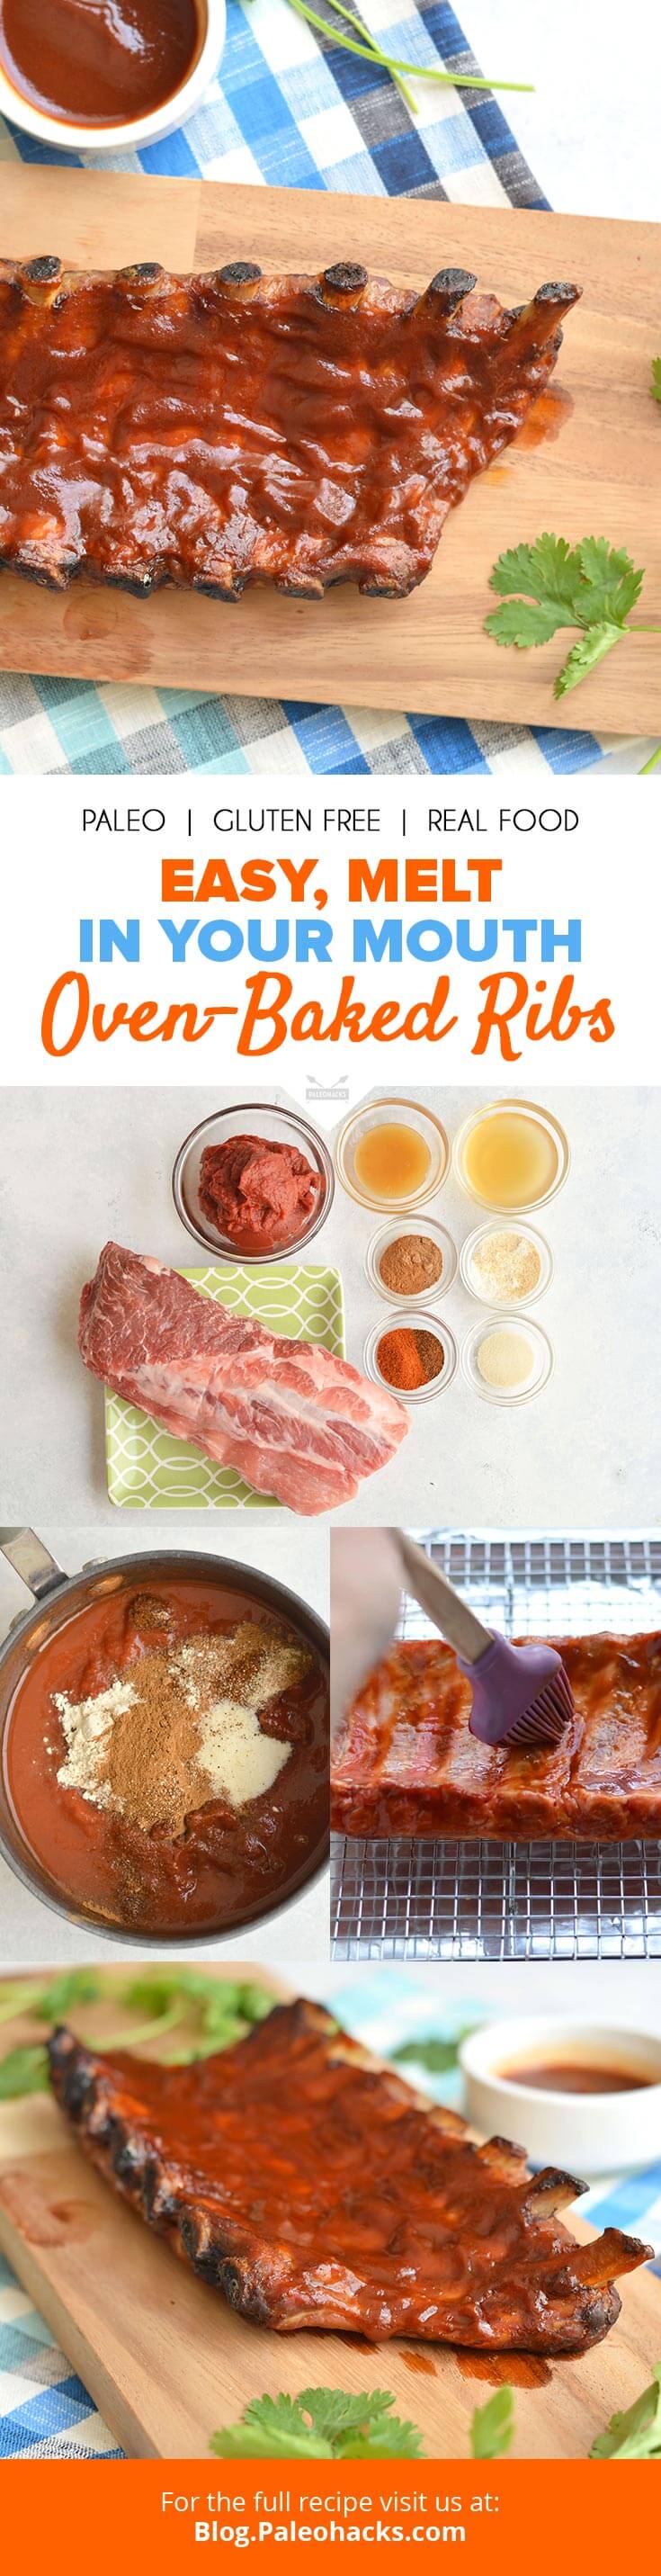 oven-baked ribs pin